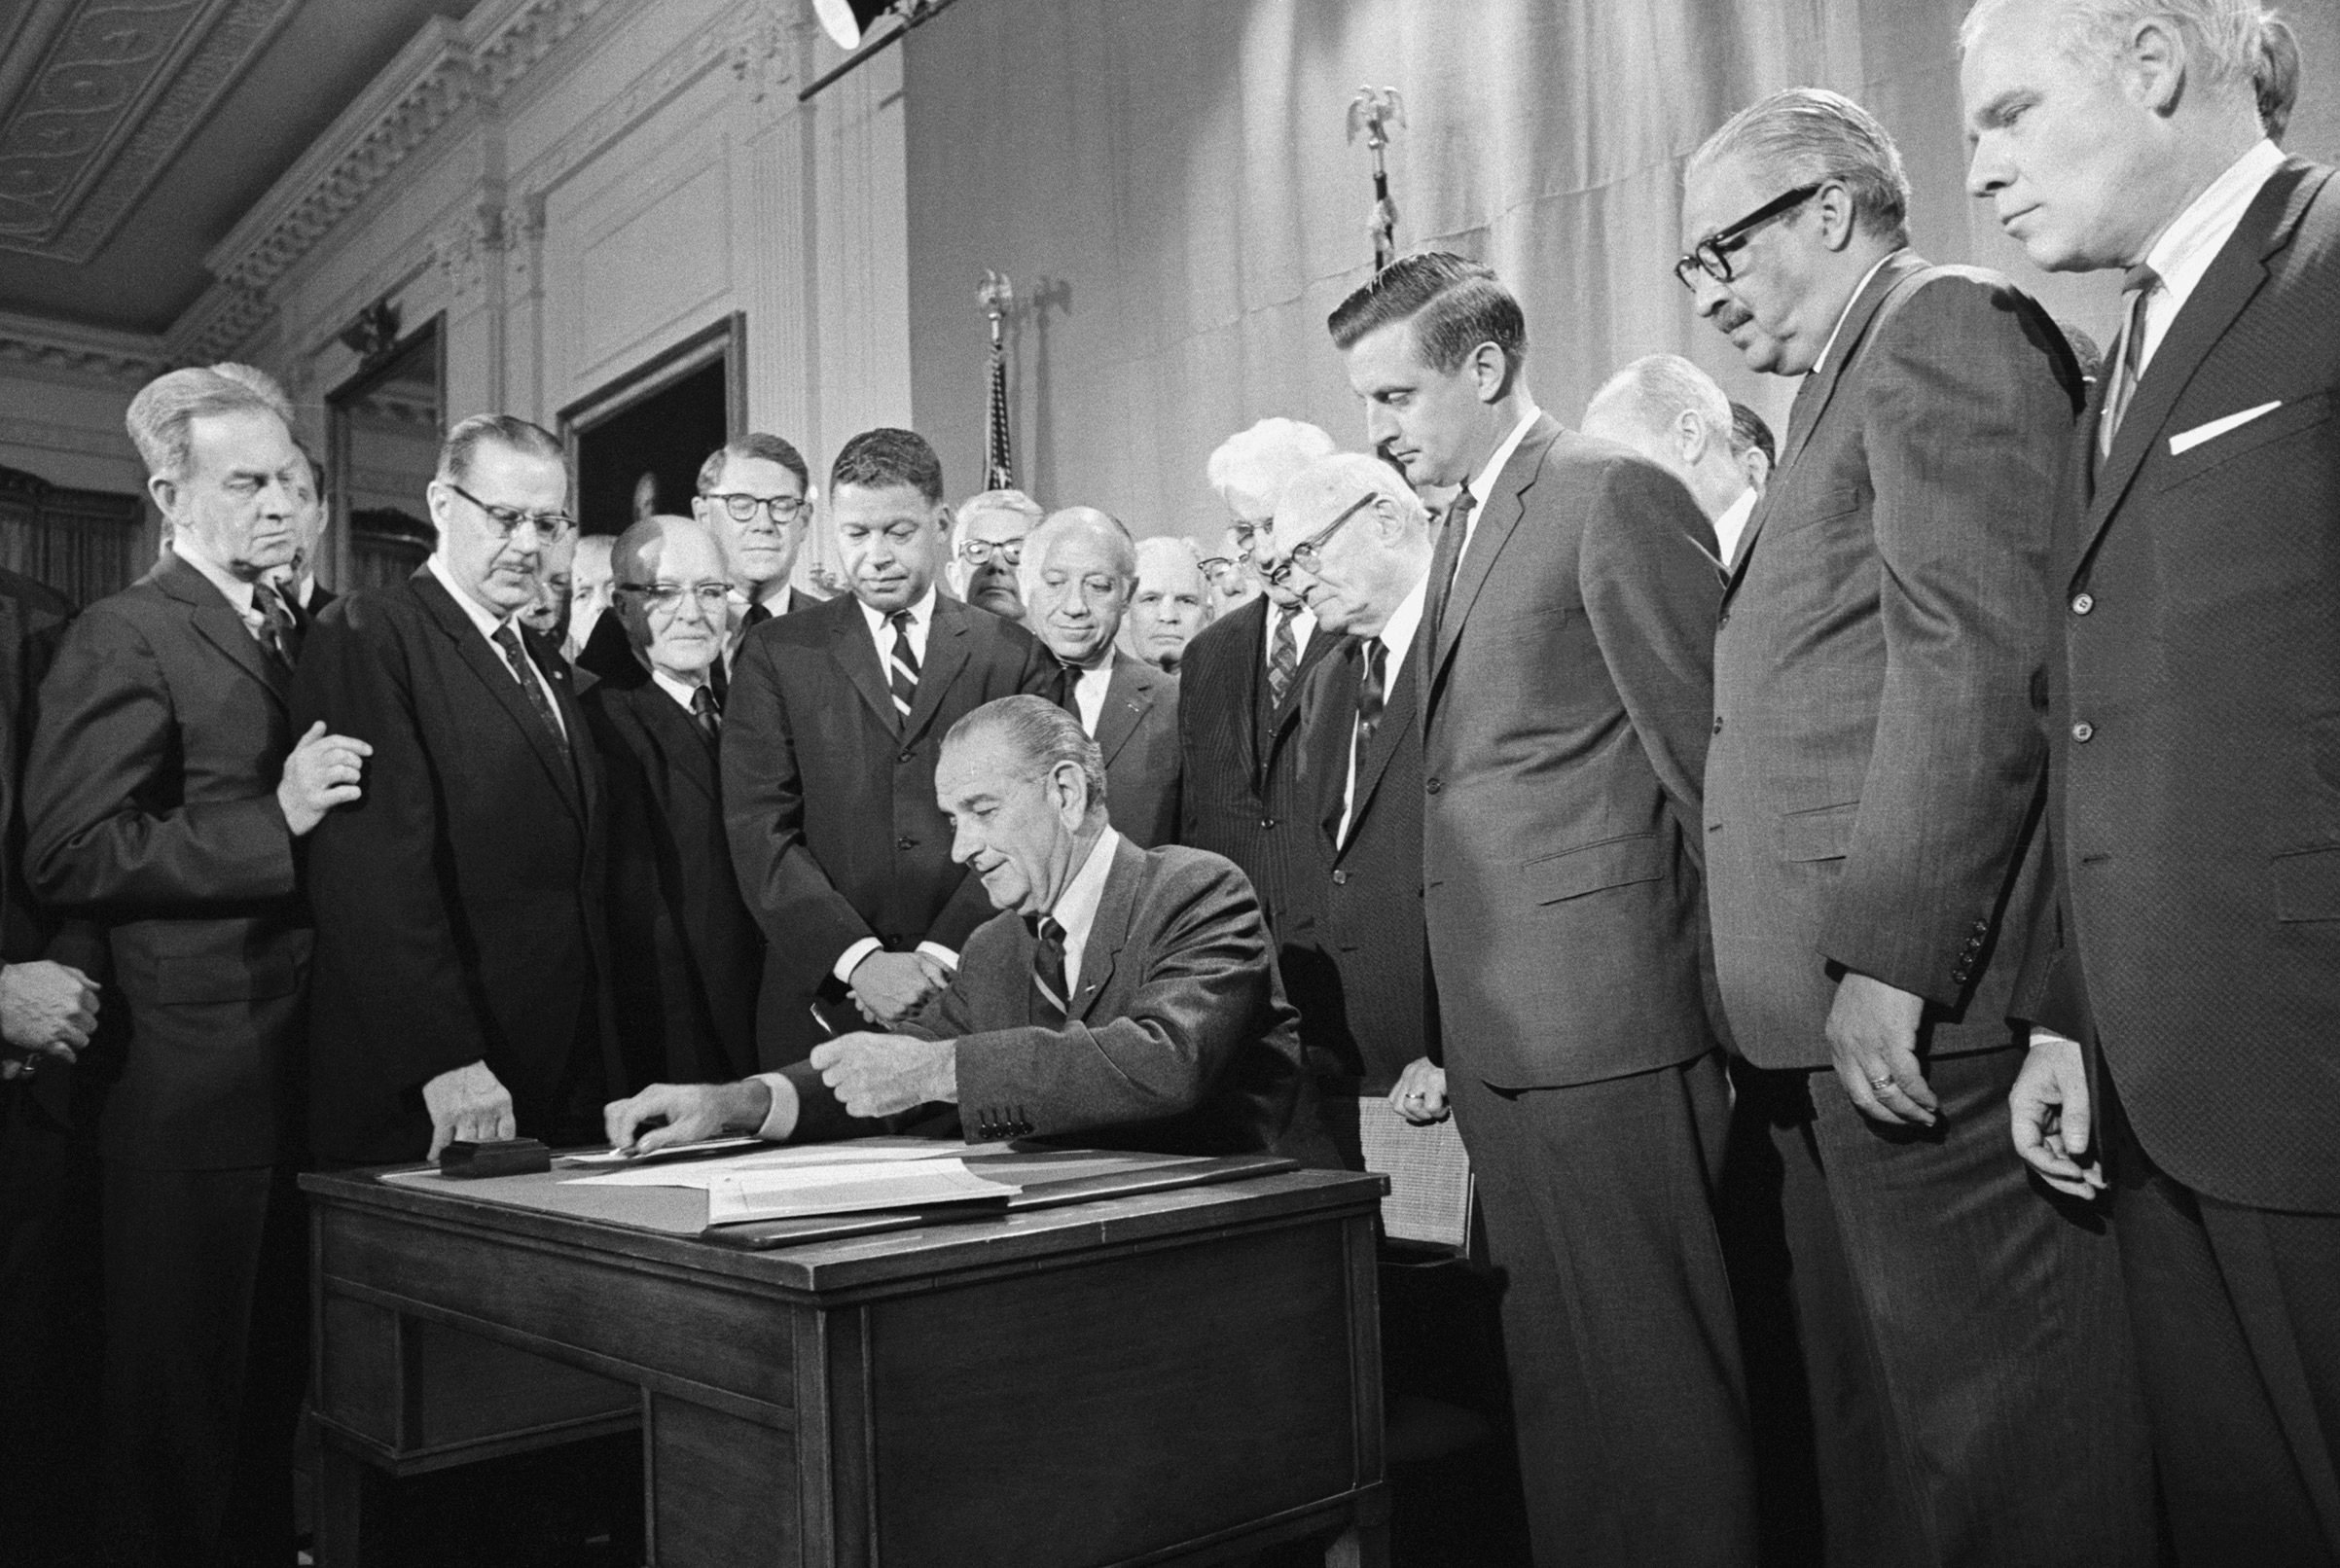 The Fair Housing Act's co-sponsors,  Democratic Senator from Minnesota Walter Mondale (third from right) and Republican Senator from Massachusetts Edward Brooke (fourth from the left in the striped tie), watch President Lyndon B. Johnson sign the civil rights bill into law on April 11, 1968. (Bettmann—Getty Images)